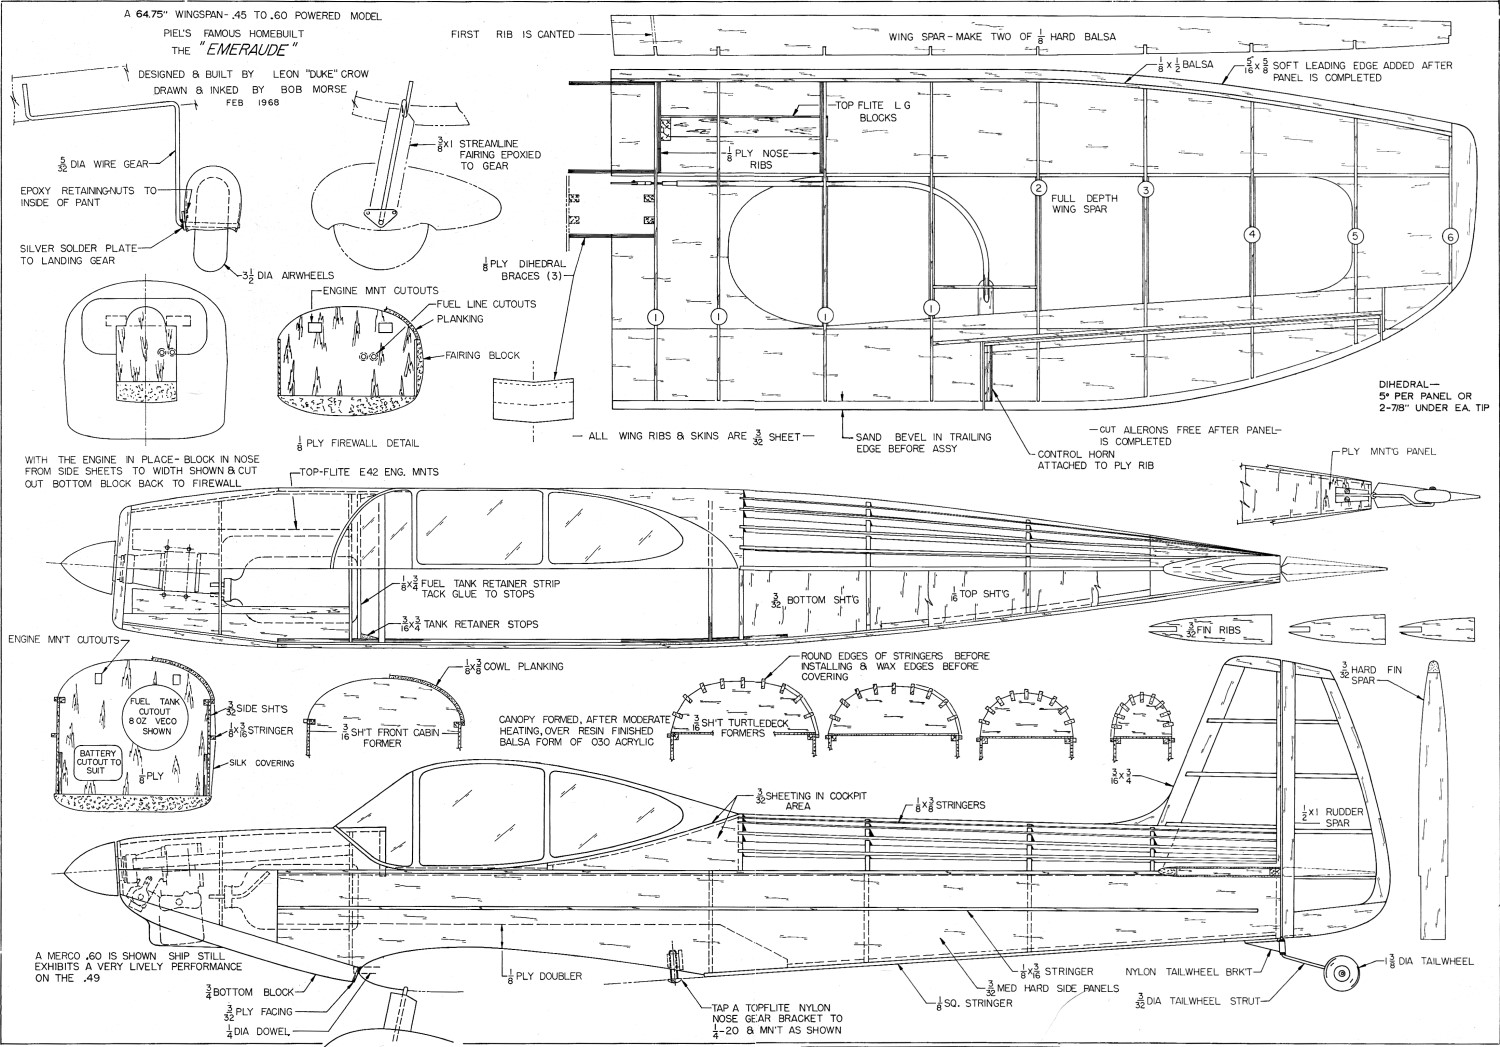 Emeraude Plans from April 1969 American Aircraft Modeler - Airplanes 